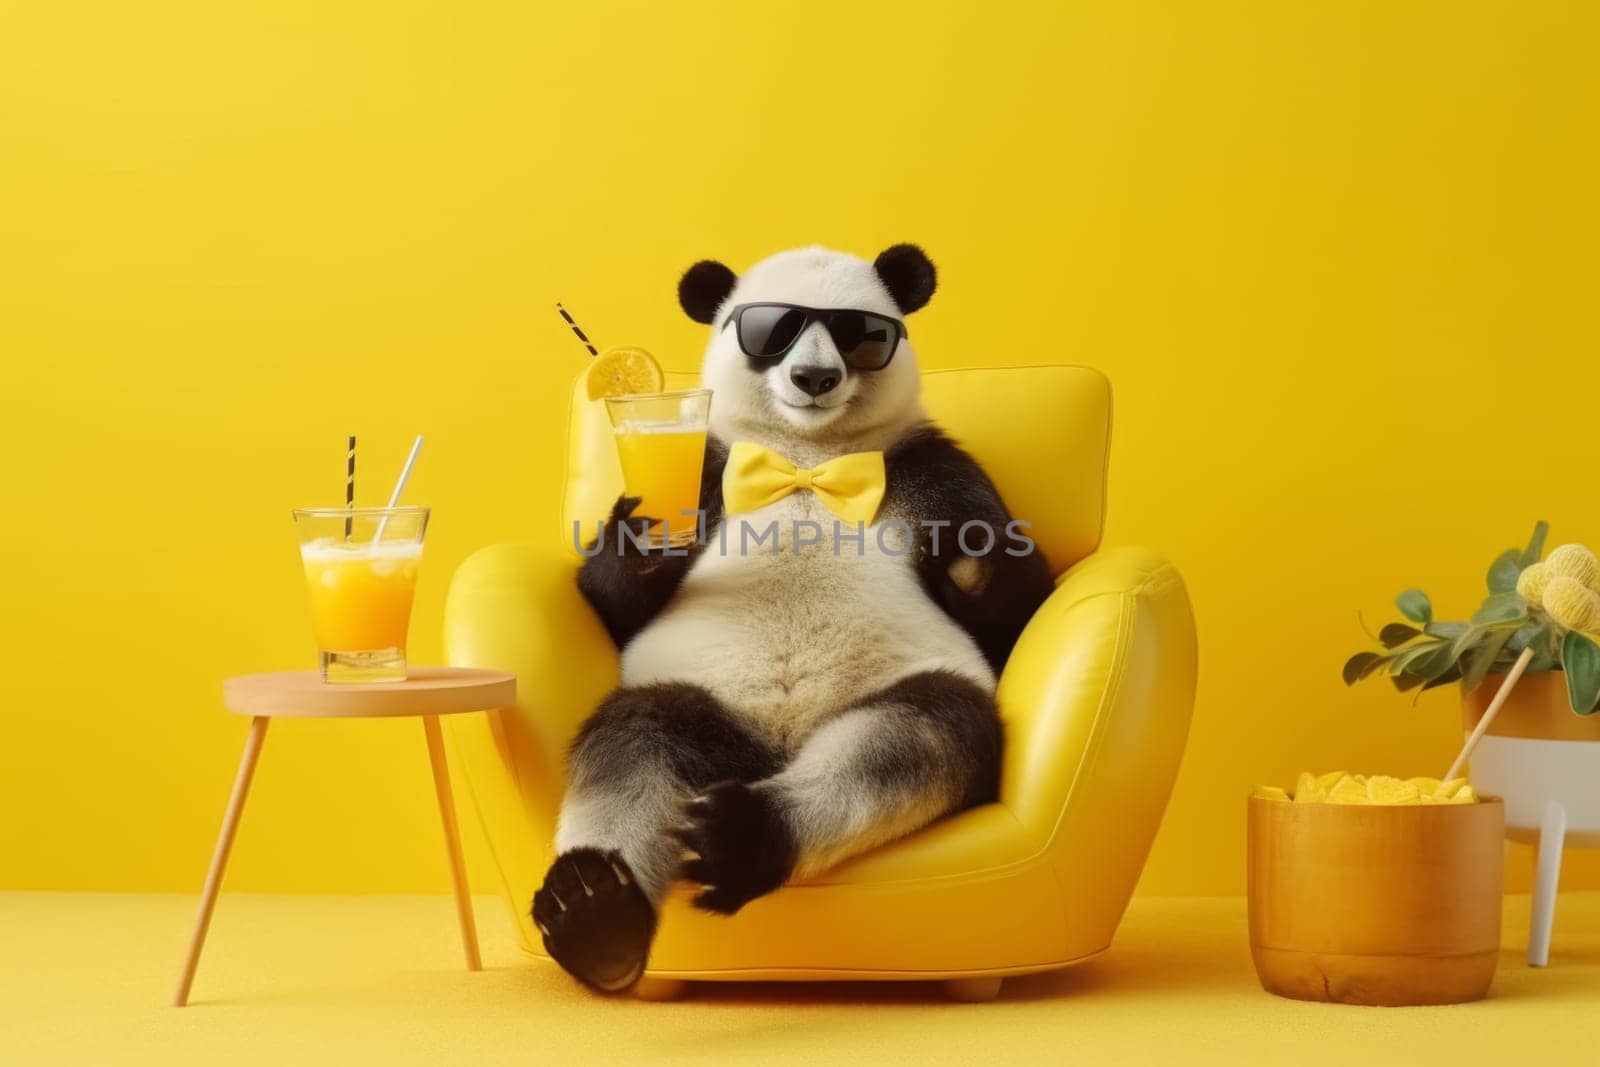 Panda Lounging with Drinks by andreyz